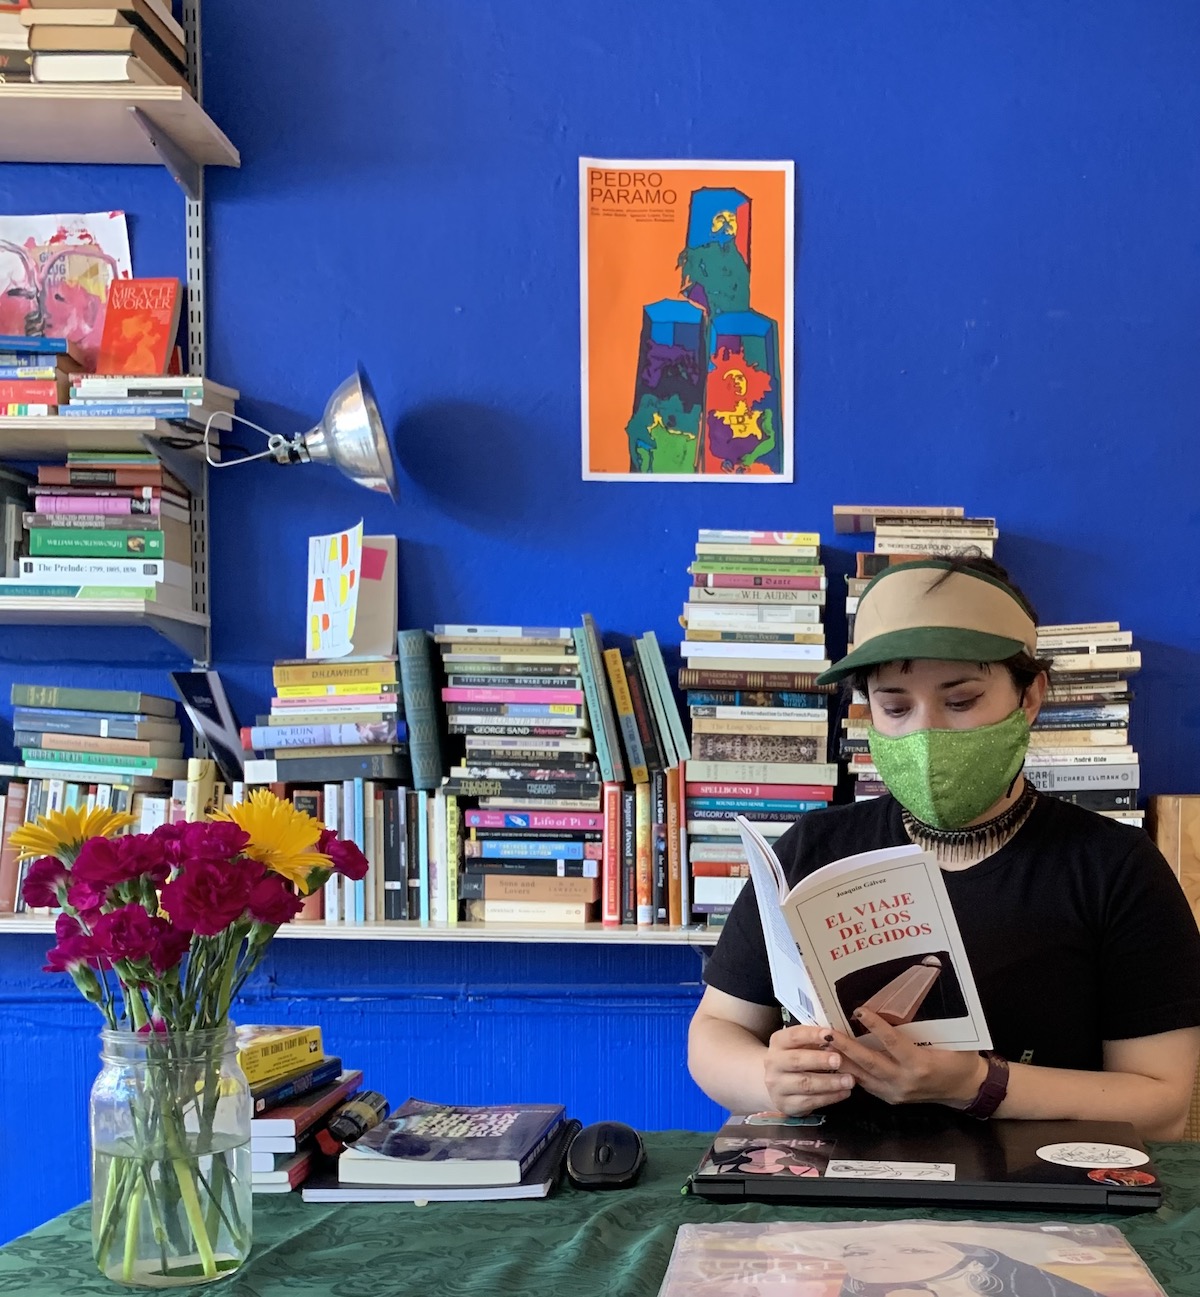 A person in a mask (Viva Padilla, founder of Re/Arte) reads a book called El Viaje De Los Elegidos inside a blue walled room full of stacked books.